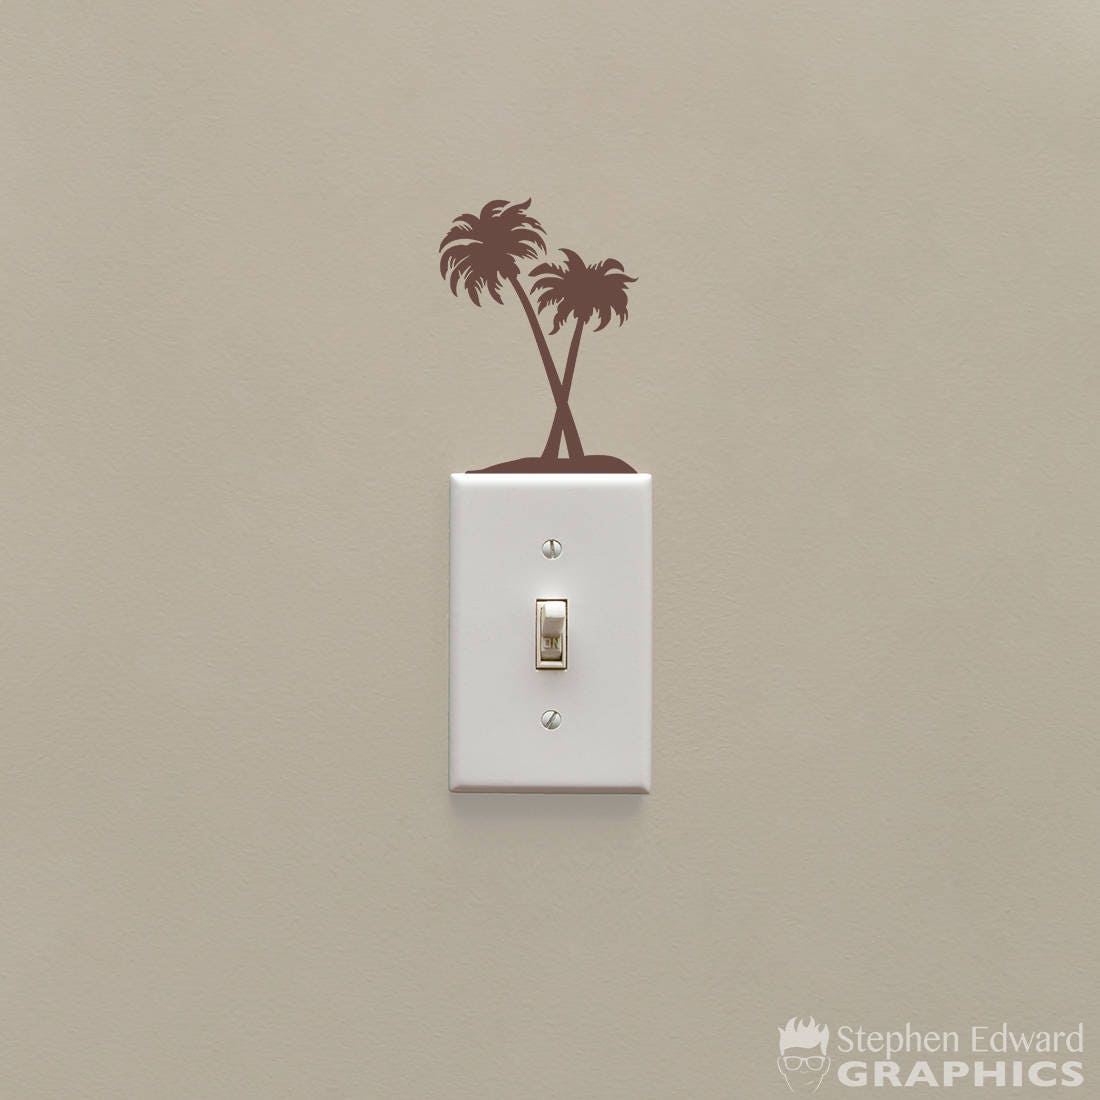 Palm Tree Light Switch Decal - Lightswitch Tropical Decal - Light Switch Cover decor